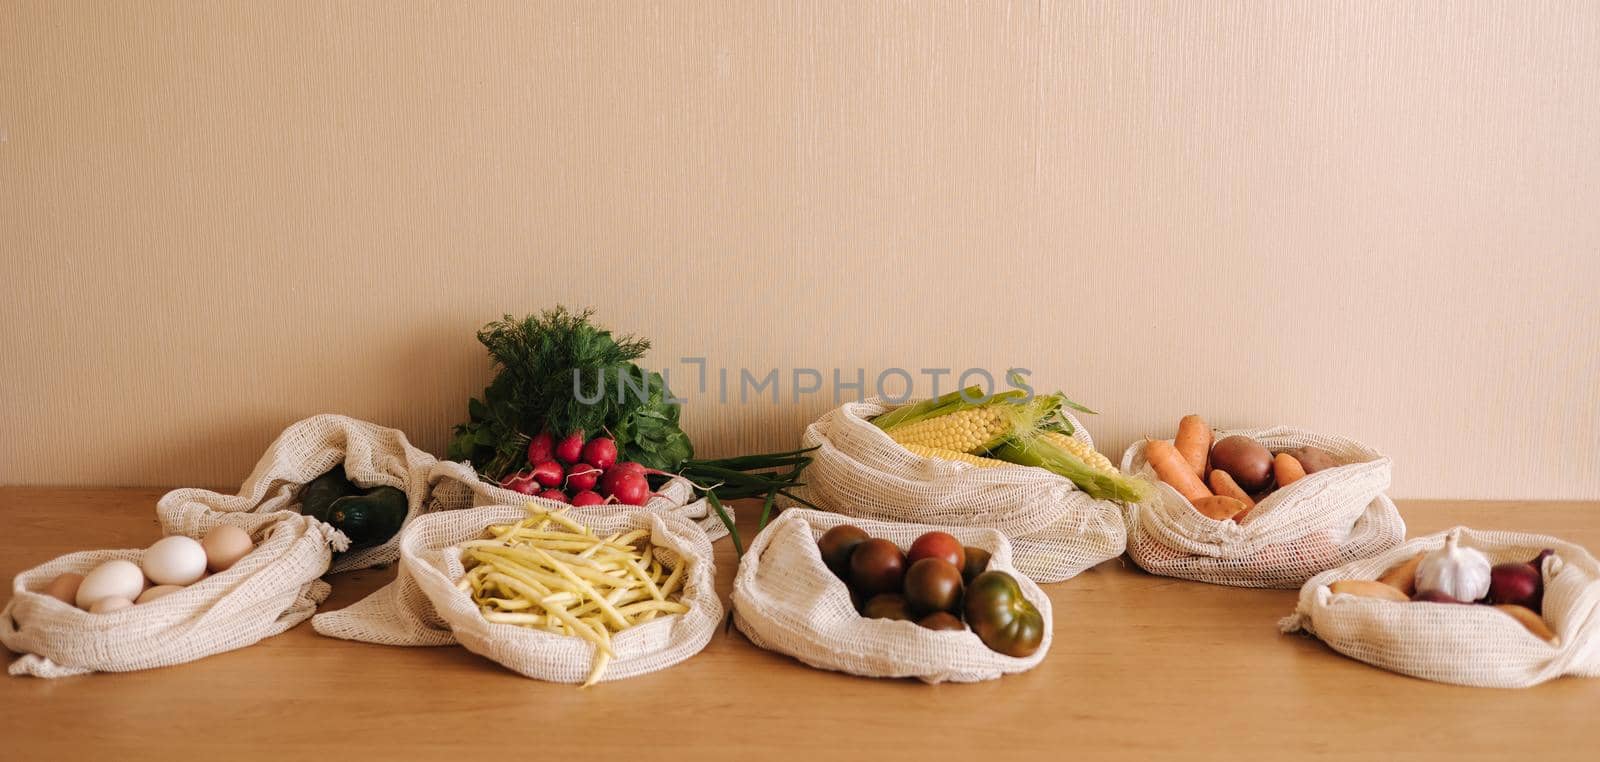 Vegetables in reusable eco cotton bags on wooden table. Zero waste shopping concept. Canvas grocery bag with tomatoes, carrot, potato. Plastic free items.